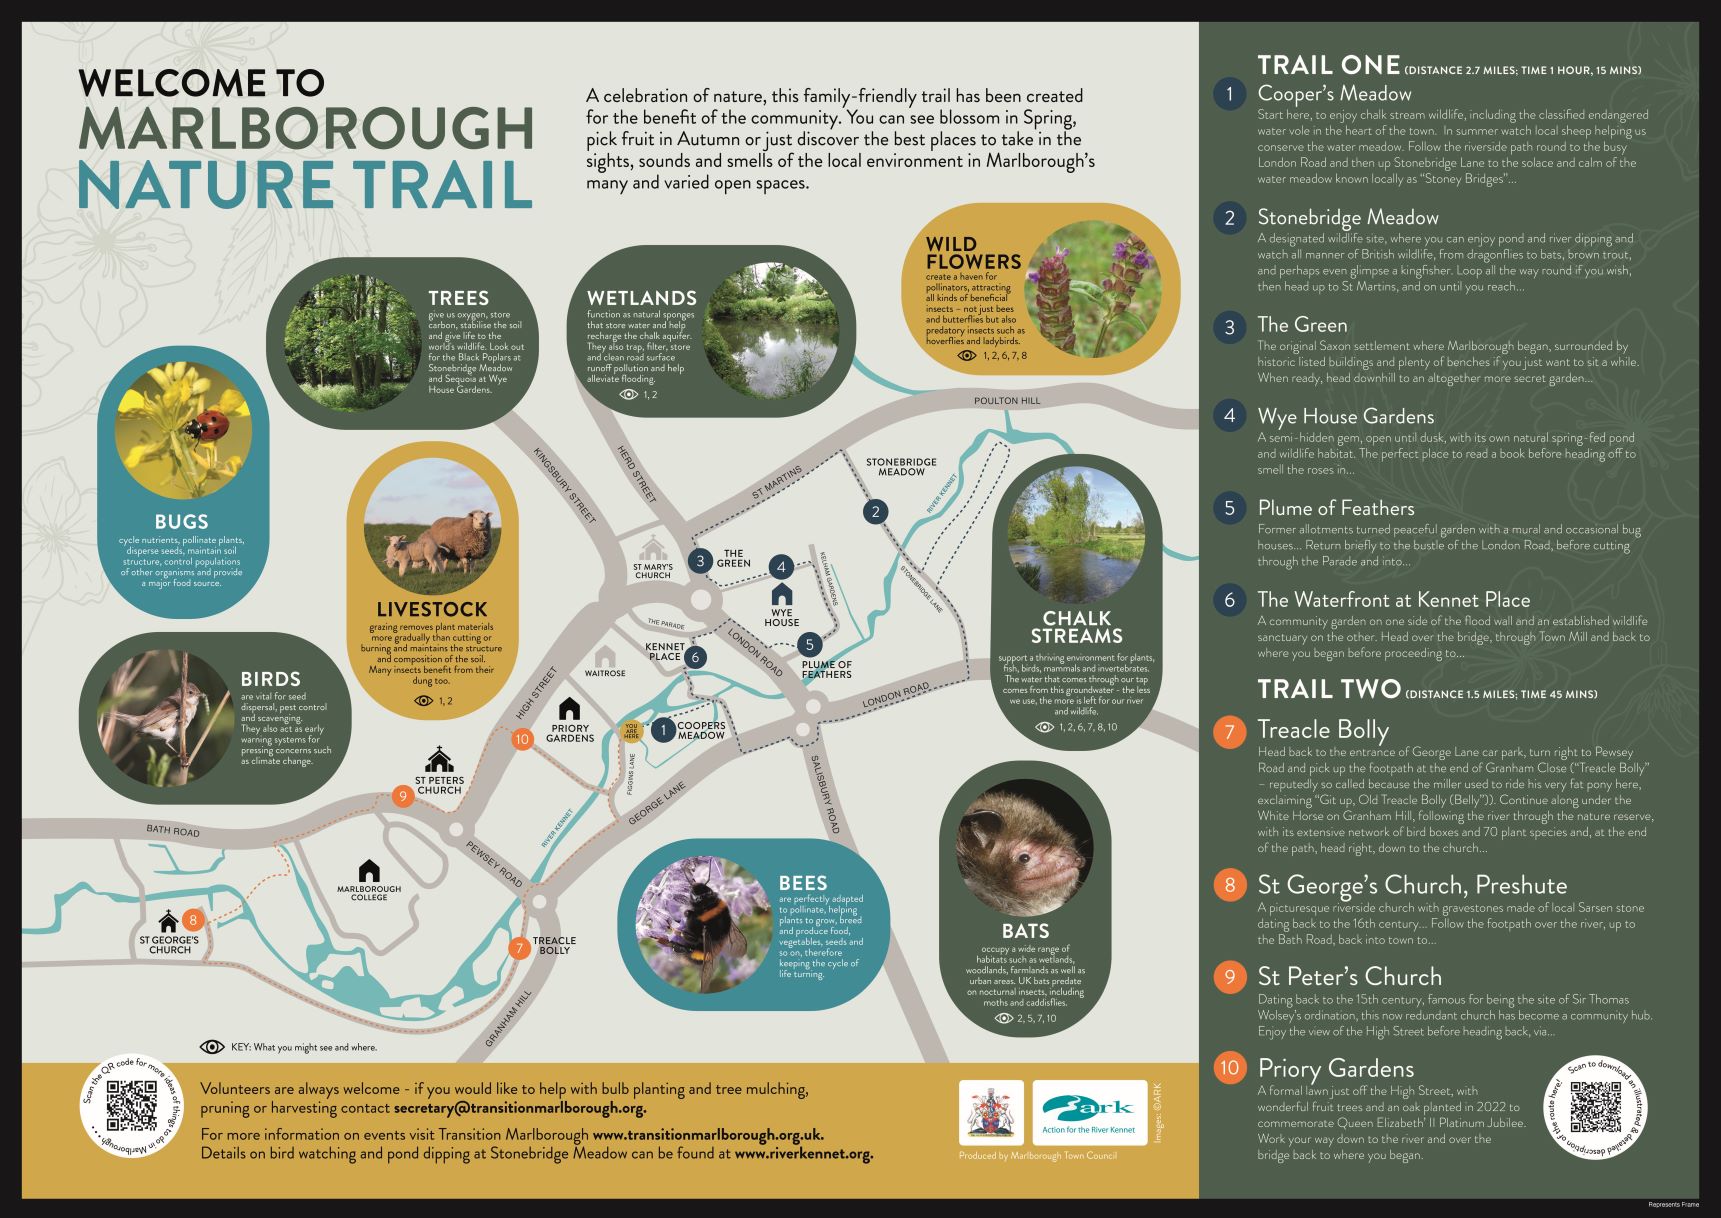 Nature-Trail information panel and route map